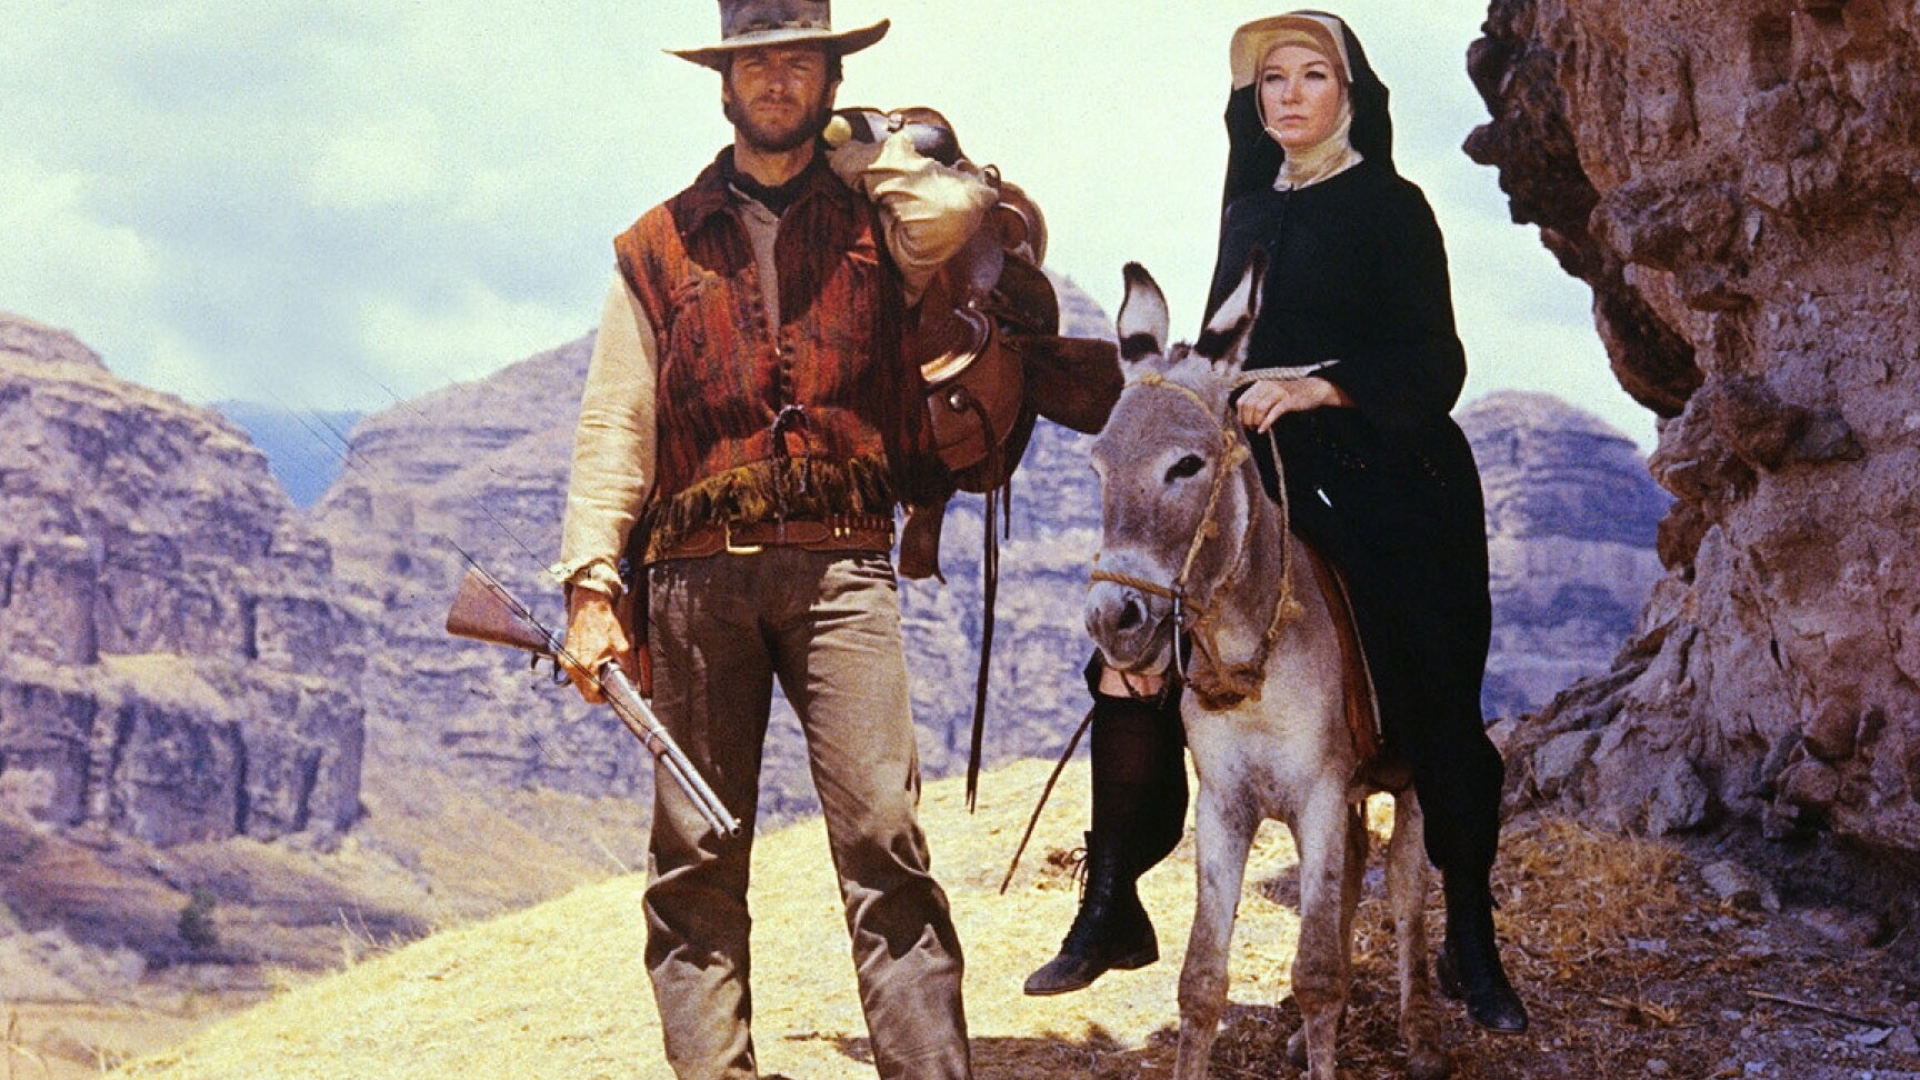 Clint Eastwood: Two Mules for Sister Sara, American-Mexican Western Film In Panavision, Directed By Don Siegel, Starring Shirley MacLaine, 1970. 1920x1080 Full HD Wallpaper.